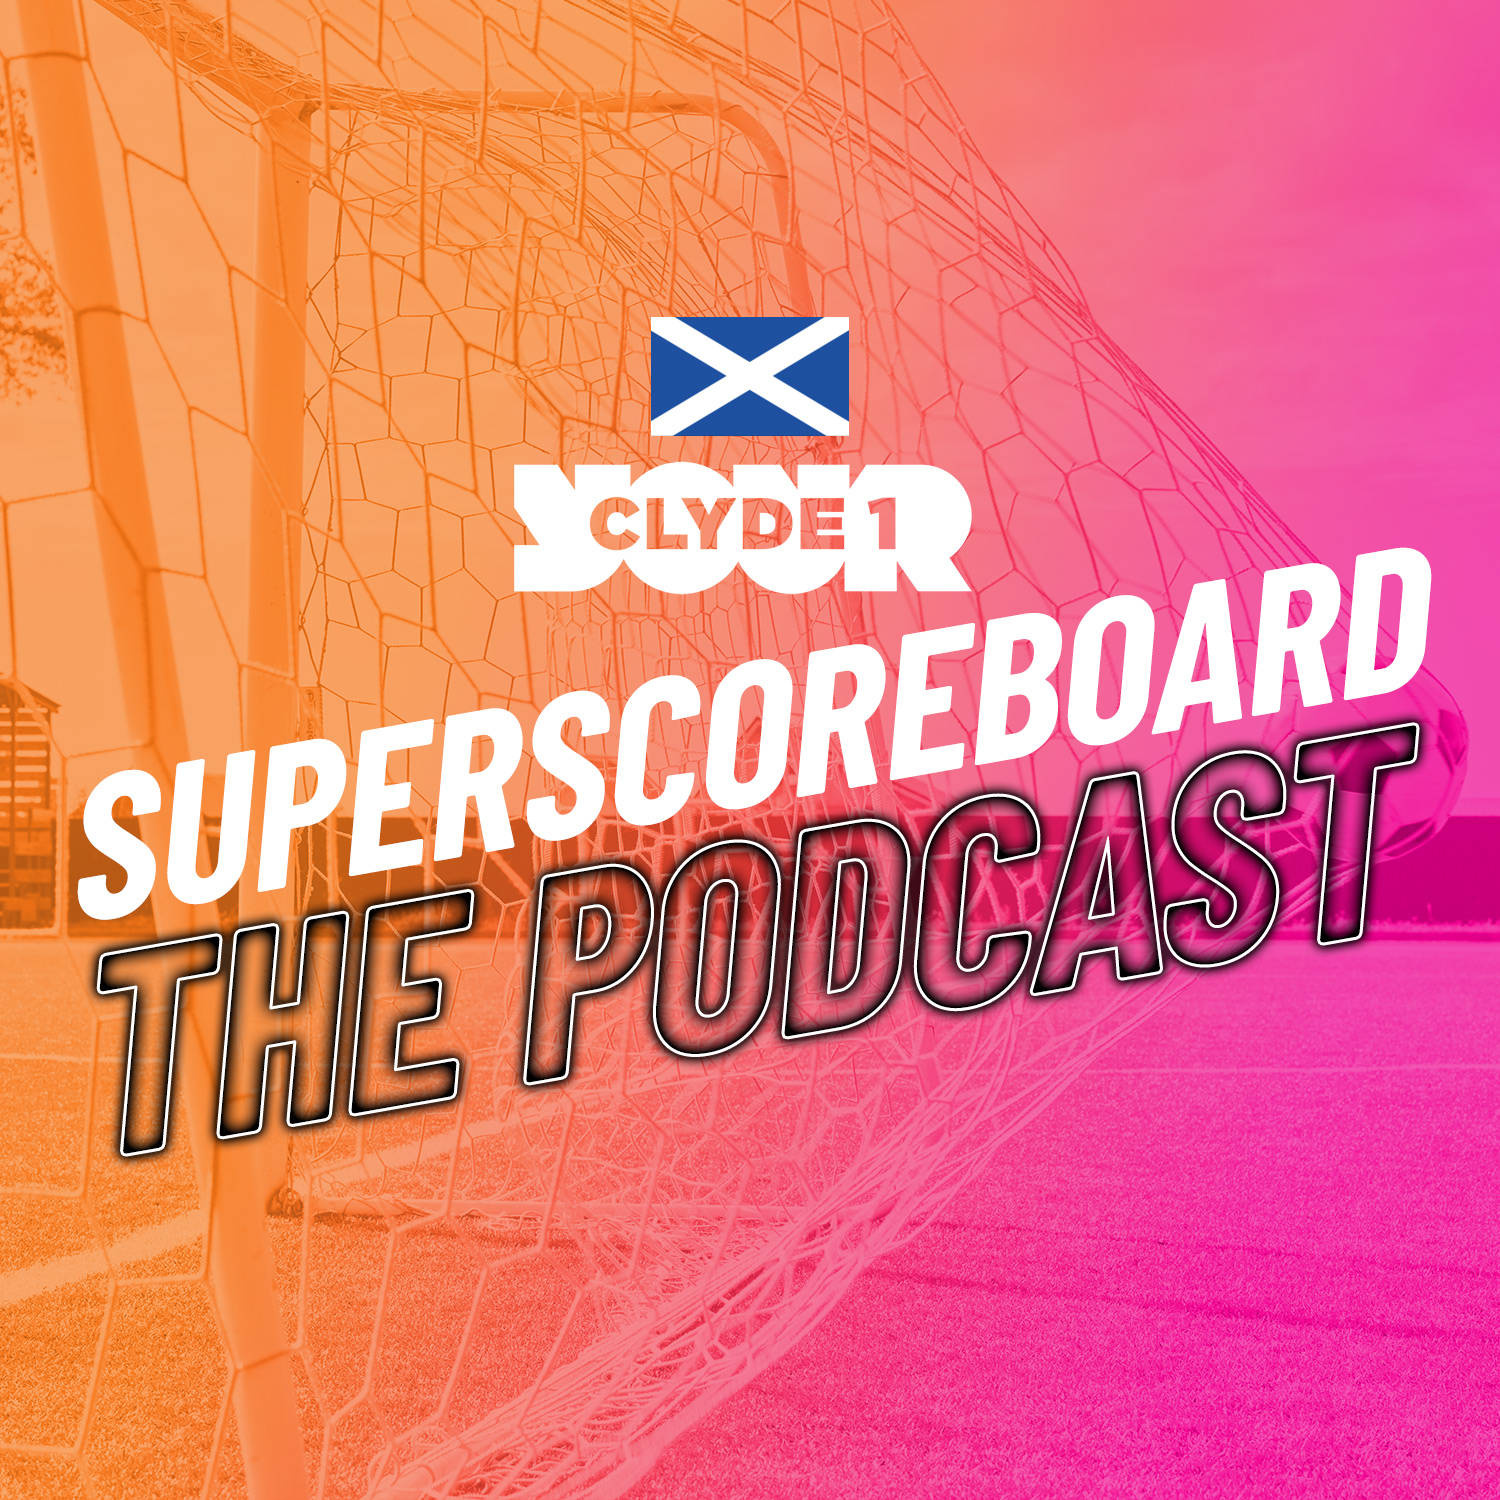 Wednesday 29th May Clyde 1 Superscoreboard